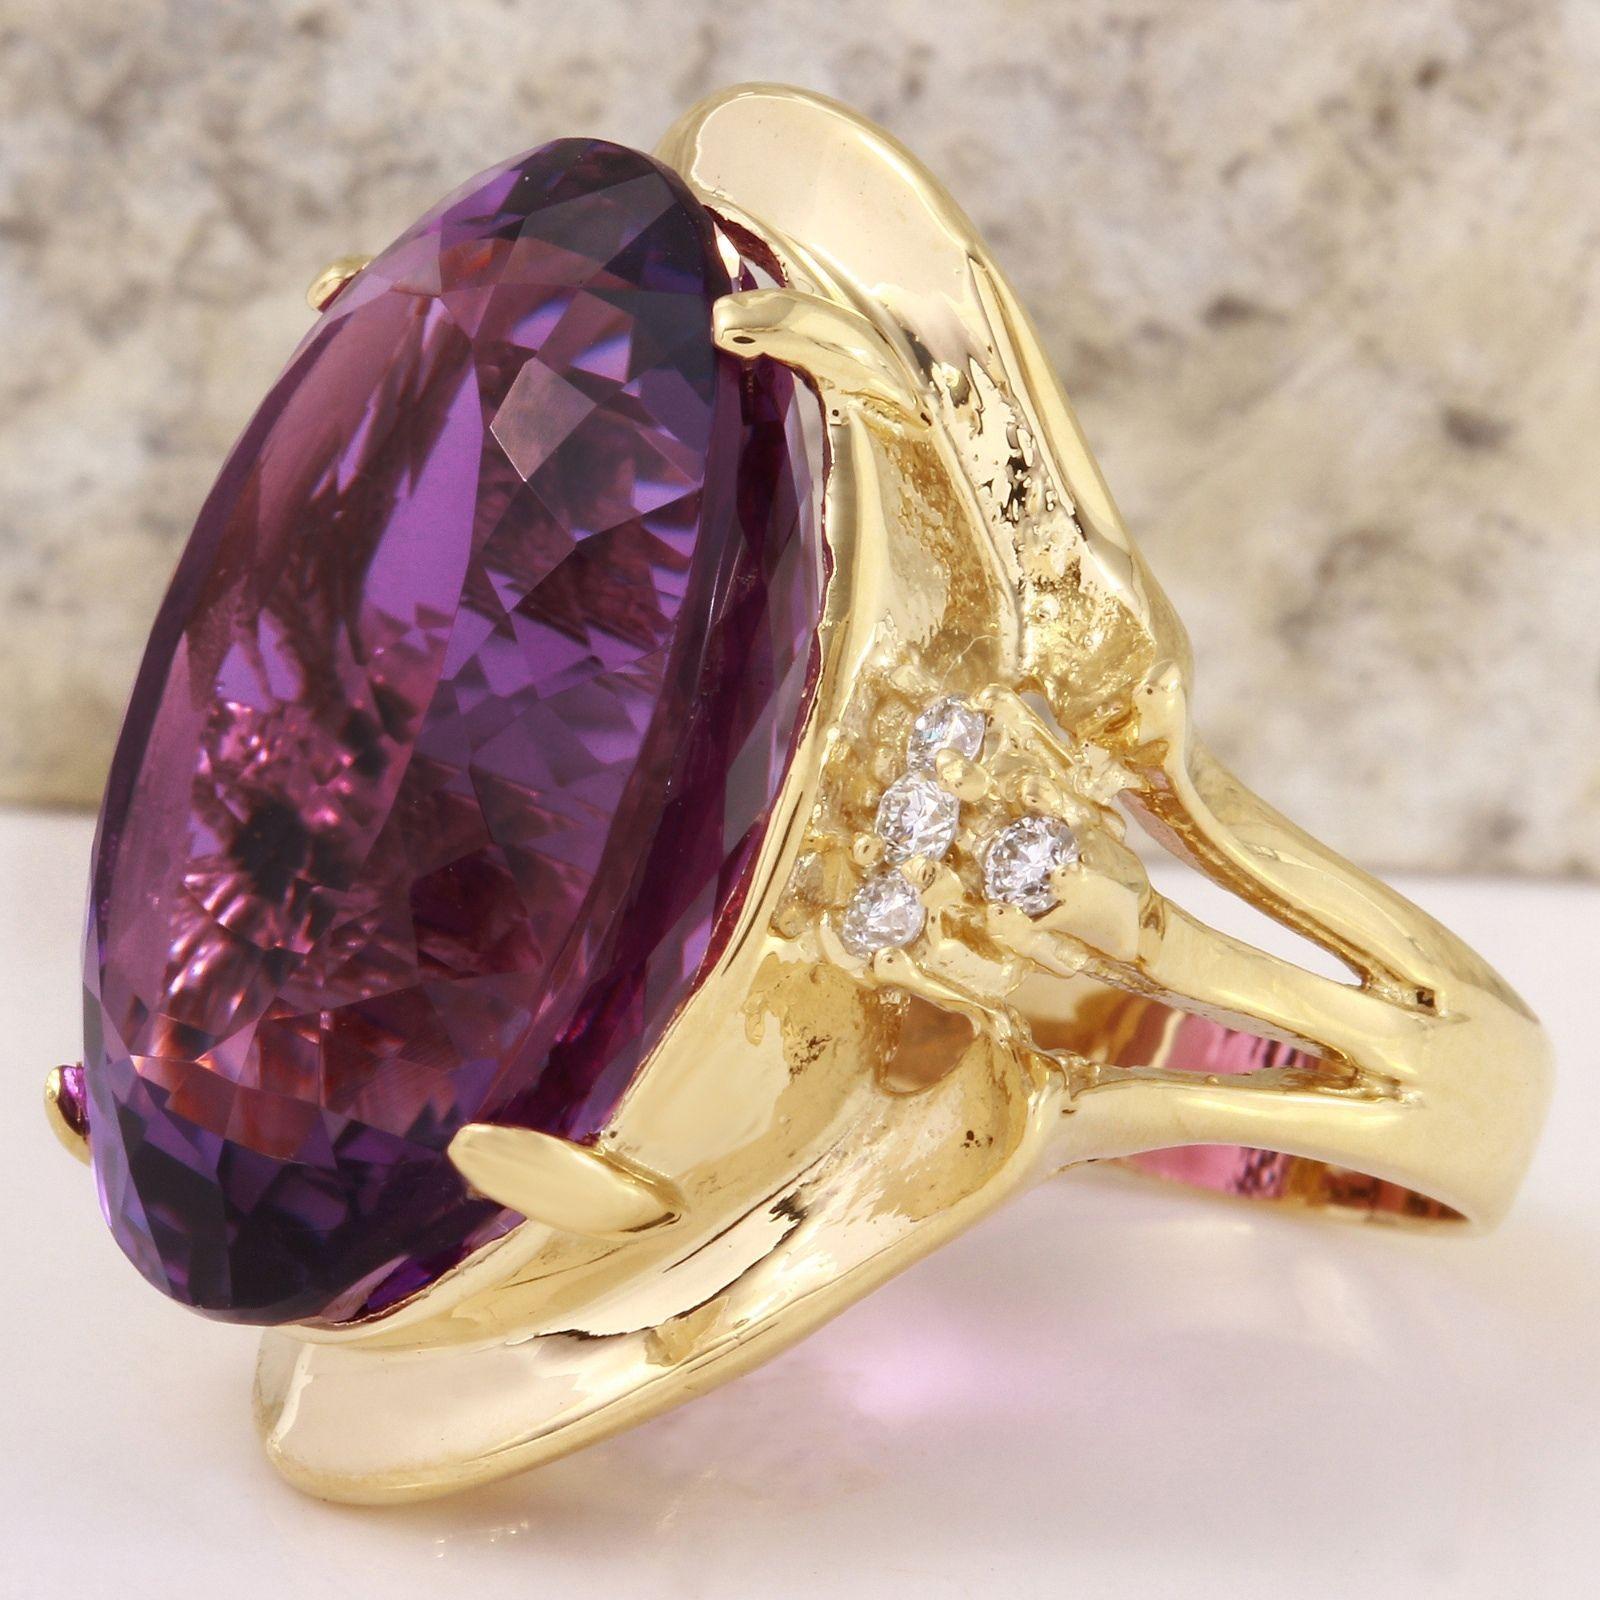 25.25 Carats Natural Amethyst and Diamond 14K Solid Yellow Gold Ring

Total Natural Oval Shaped Amethyst Weights: 25.00 Carats (VVS)

Amethyst Measures: 22.64 x 16.16mm

Natural Round Diamonds Weight: .25 Carats (color G / Clarity VS2-SI1)

Ring